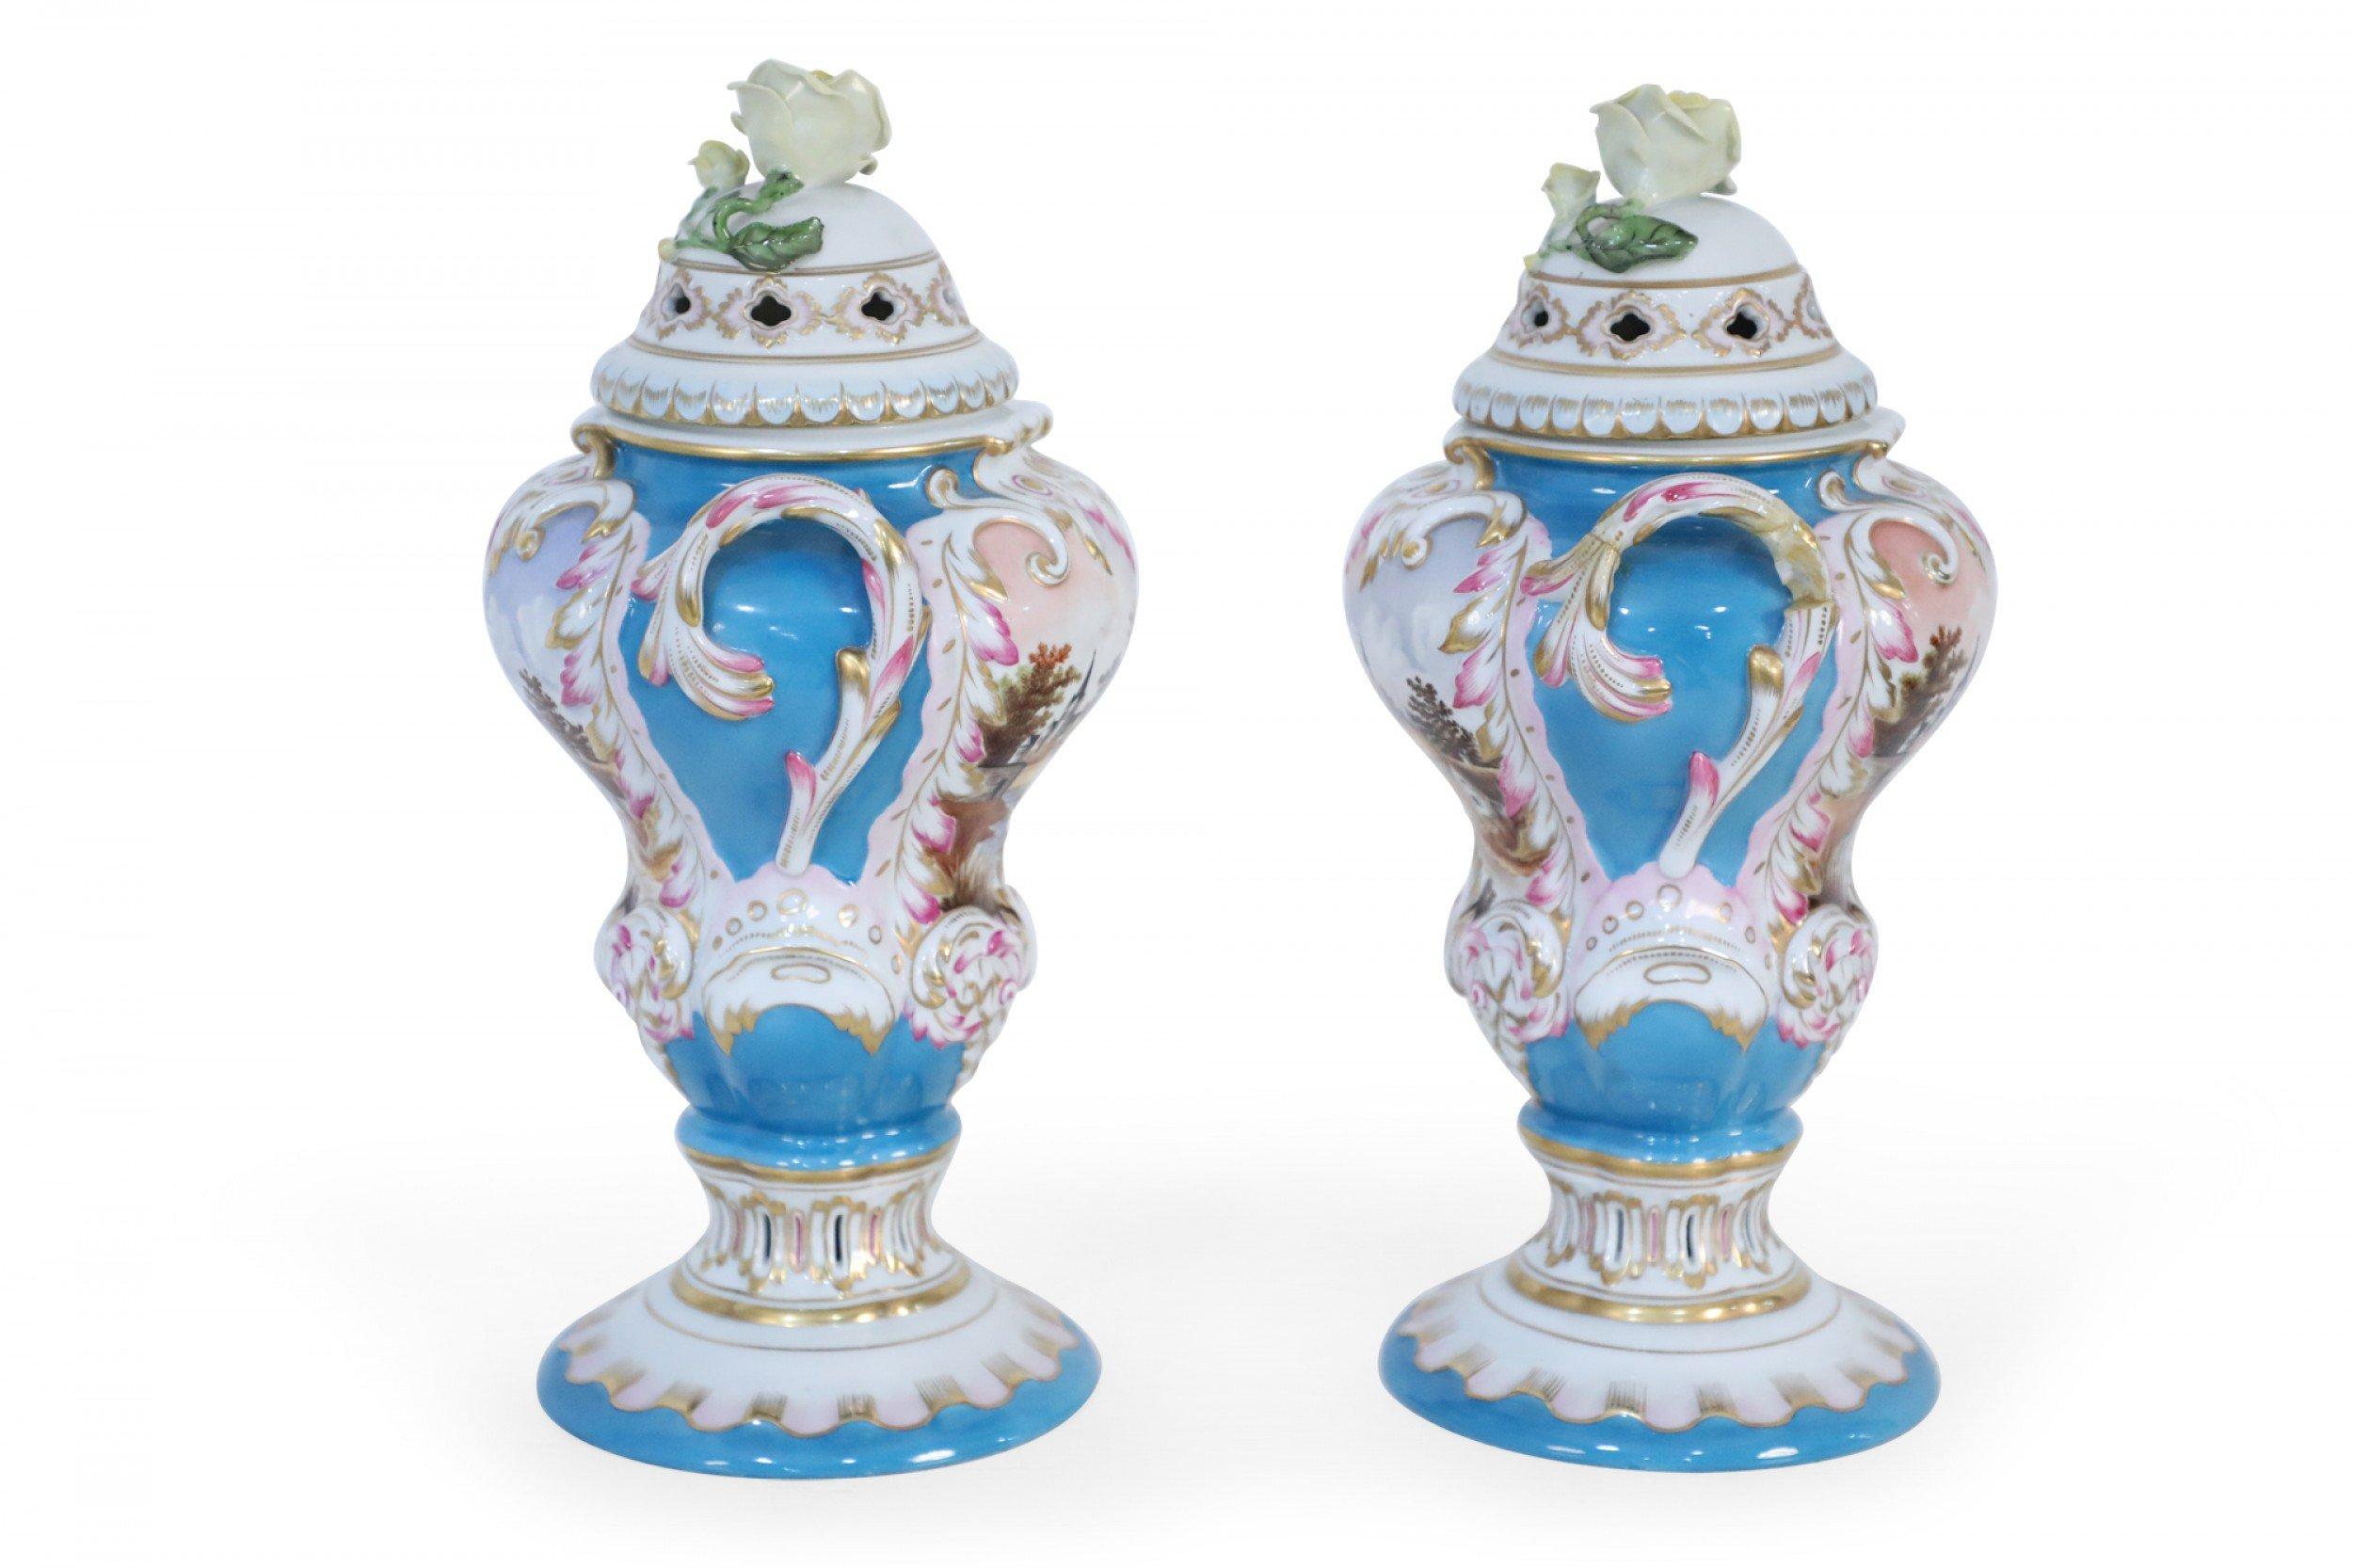 20th Century Pair of Herend Hungarian Blue Decorated and Lidded Porcelain Urns For Sale